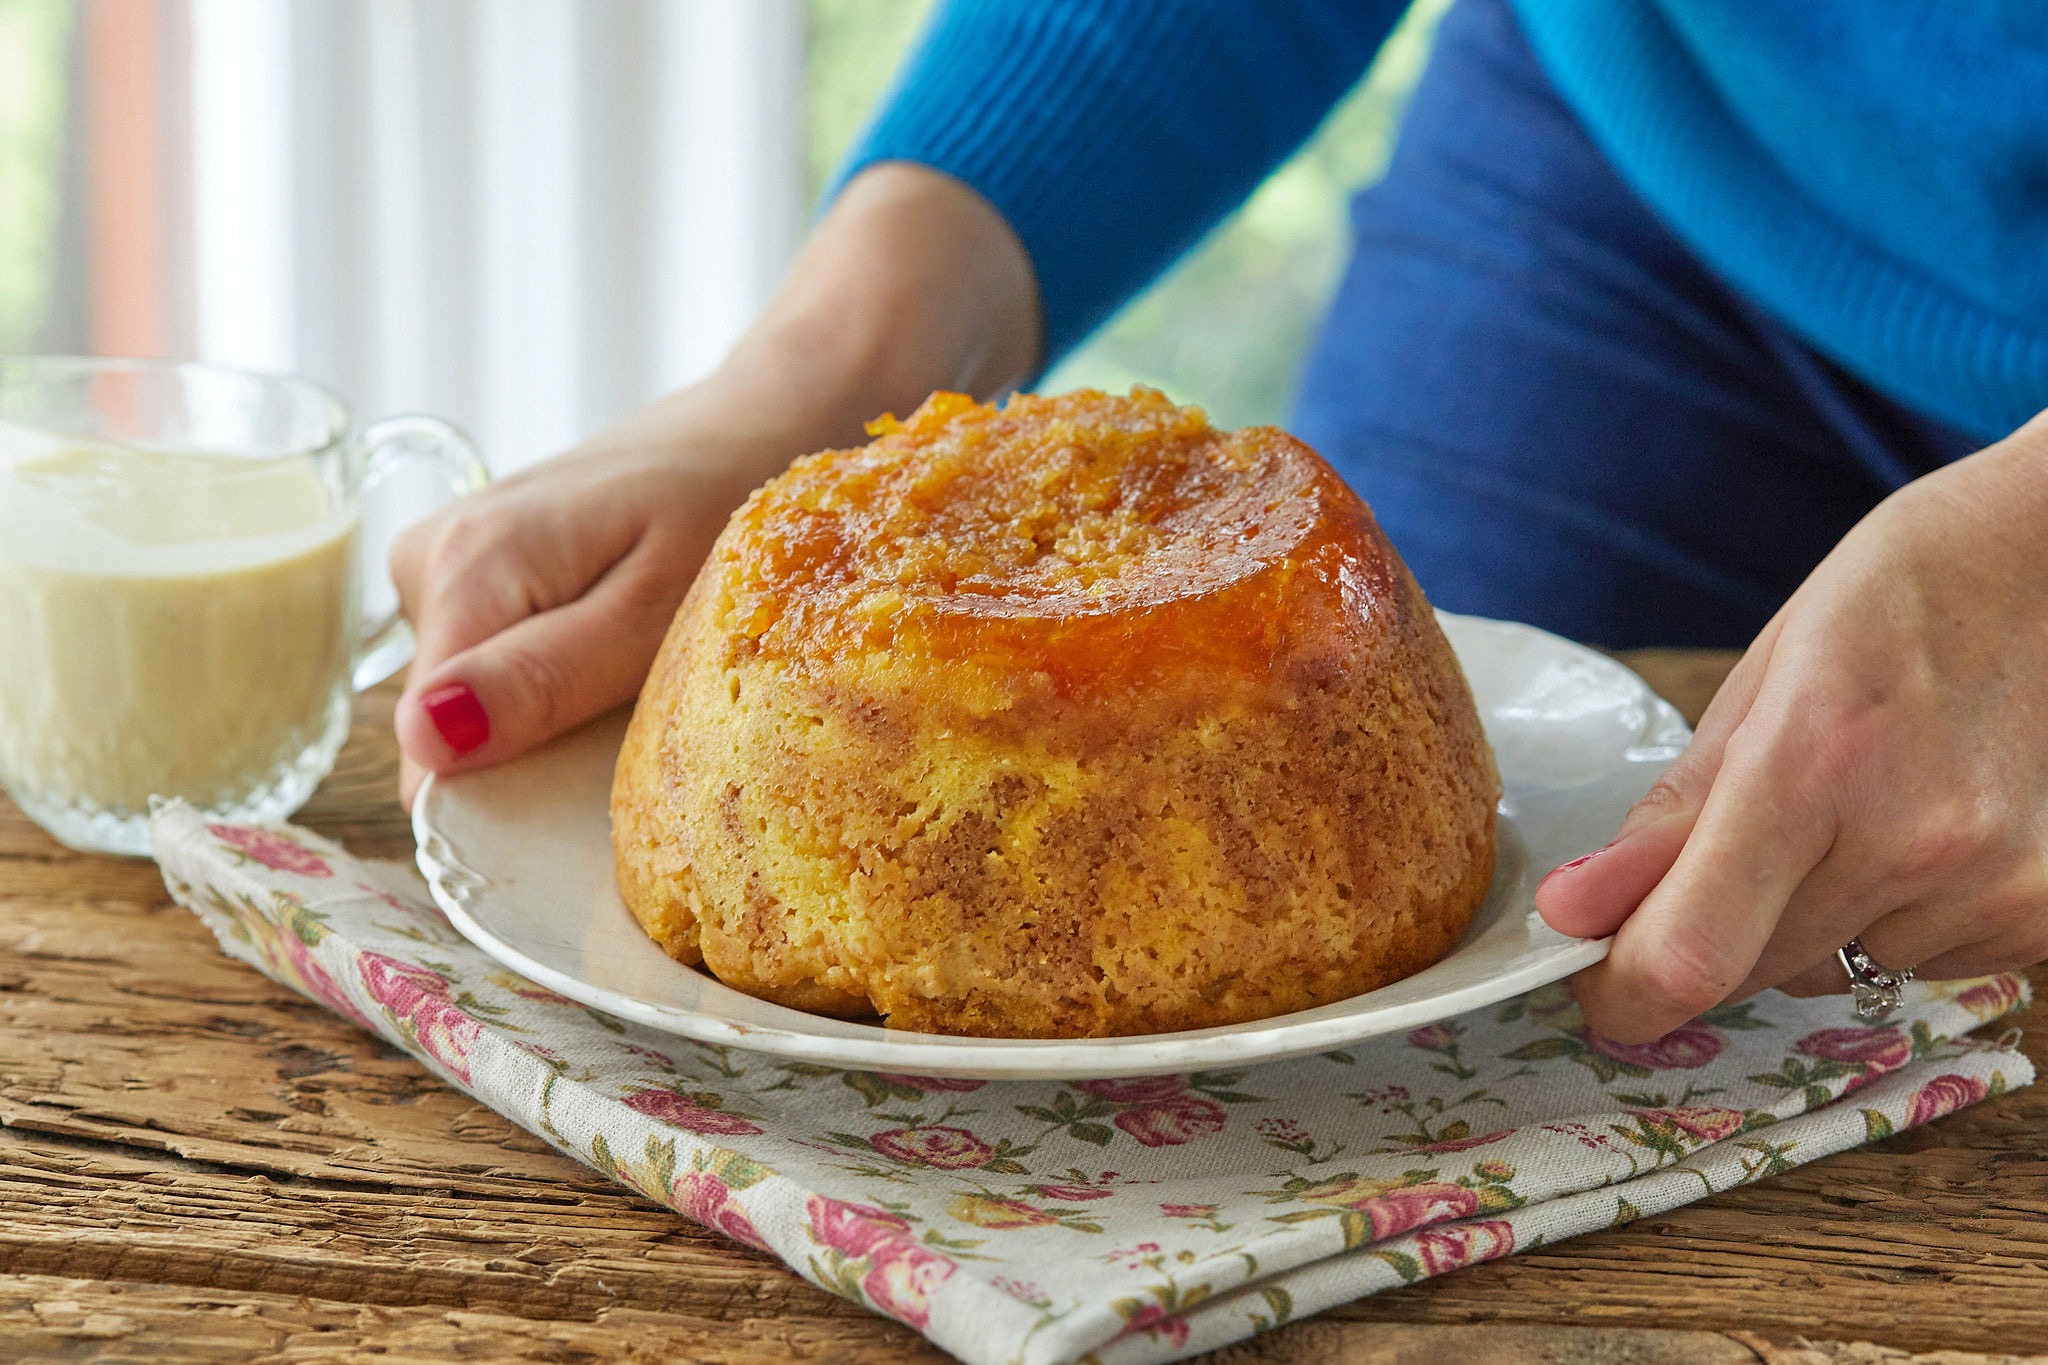 Placing a steamed marmalade pudding onto the table.